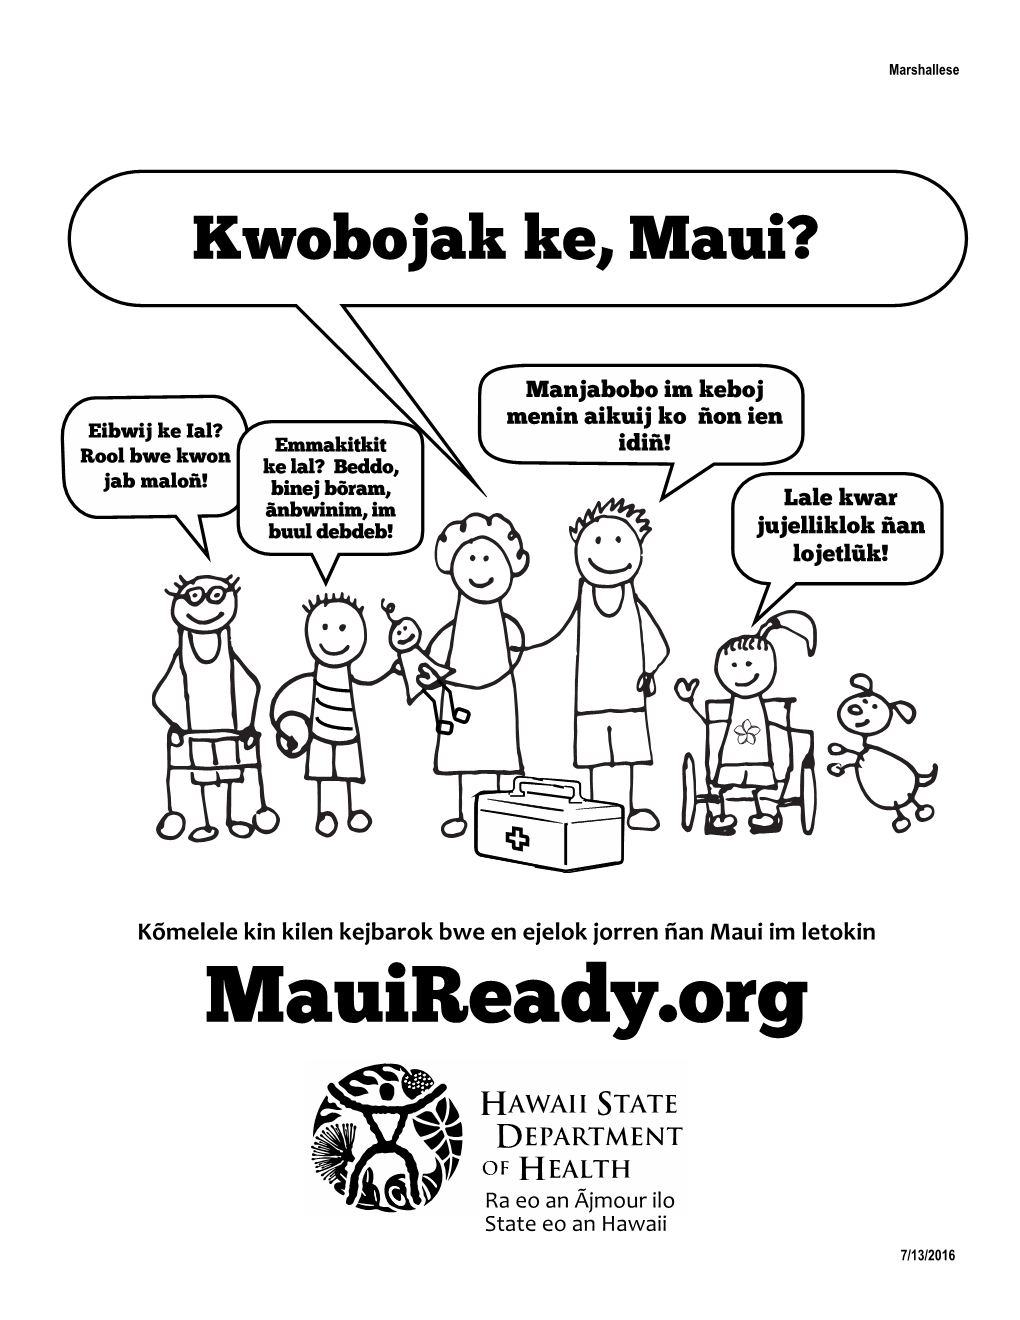 Are You Maui Ready? Marshallese